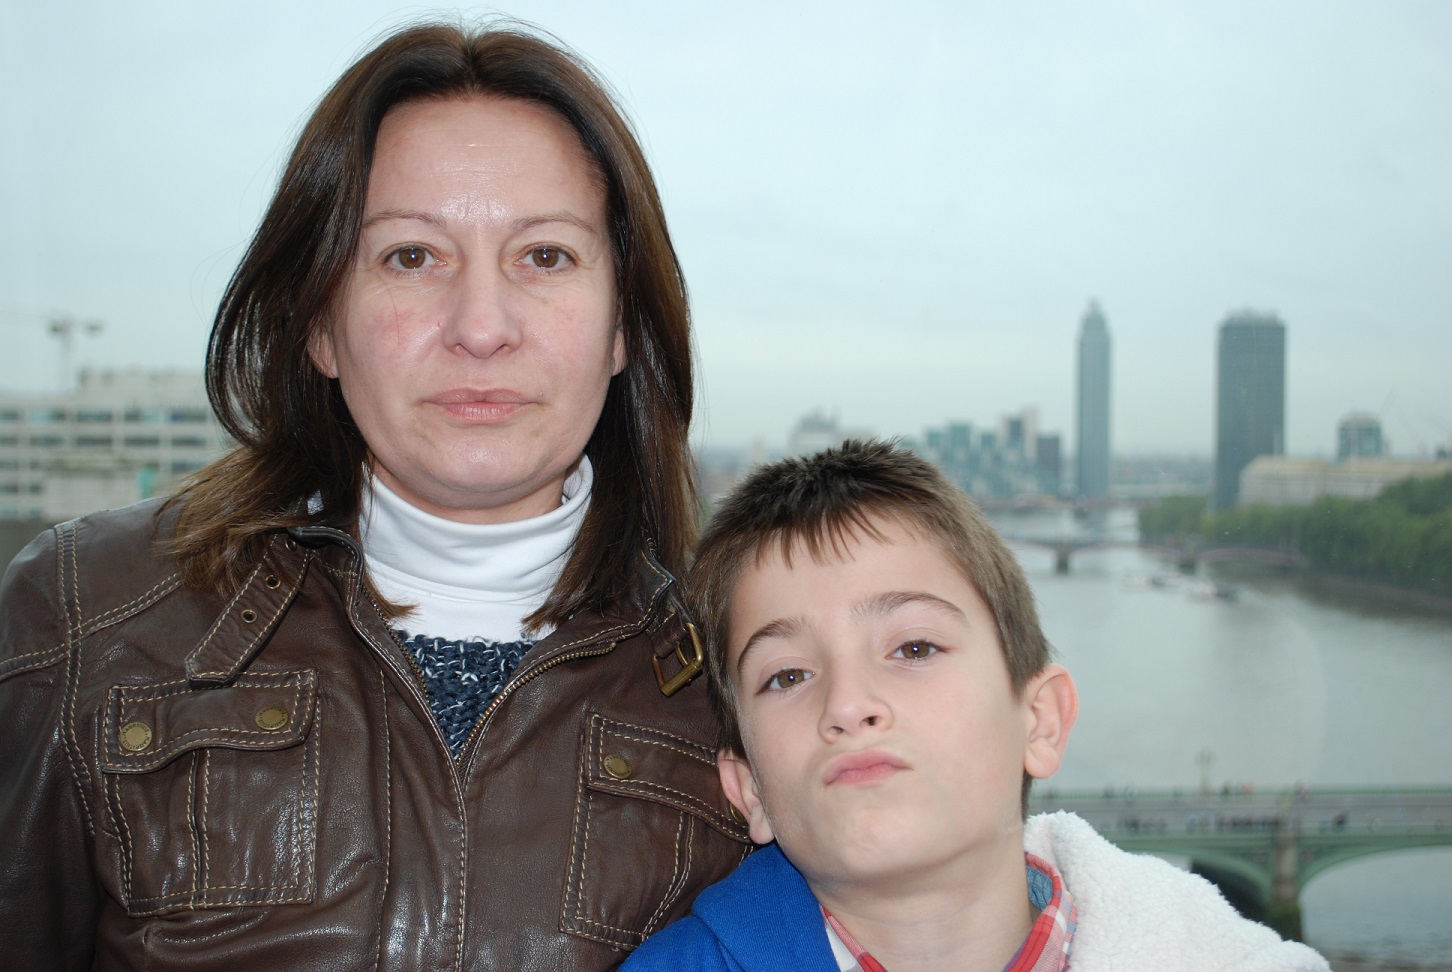 Ander with Mum, September 2013